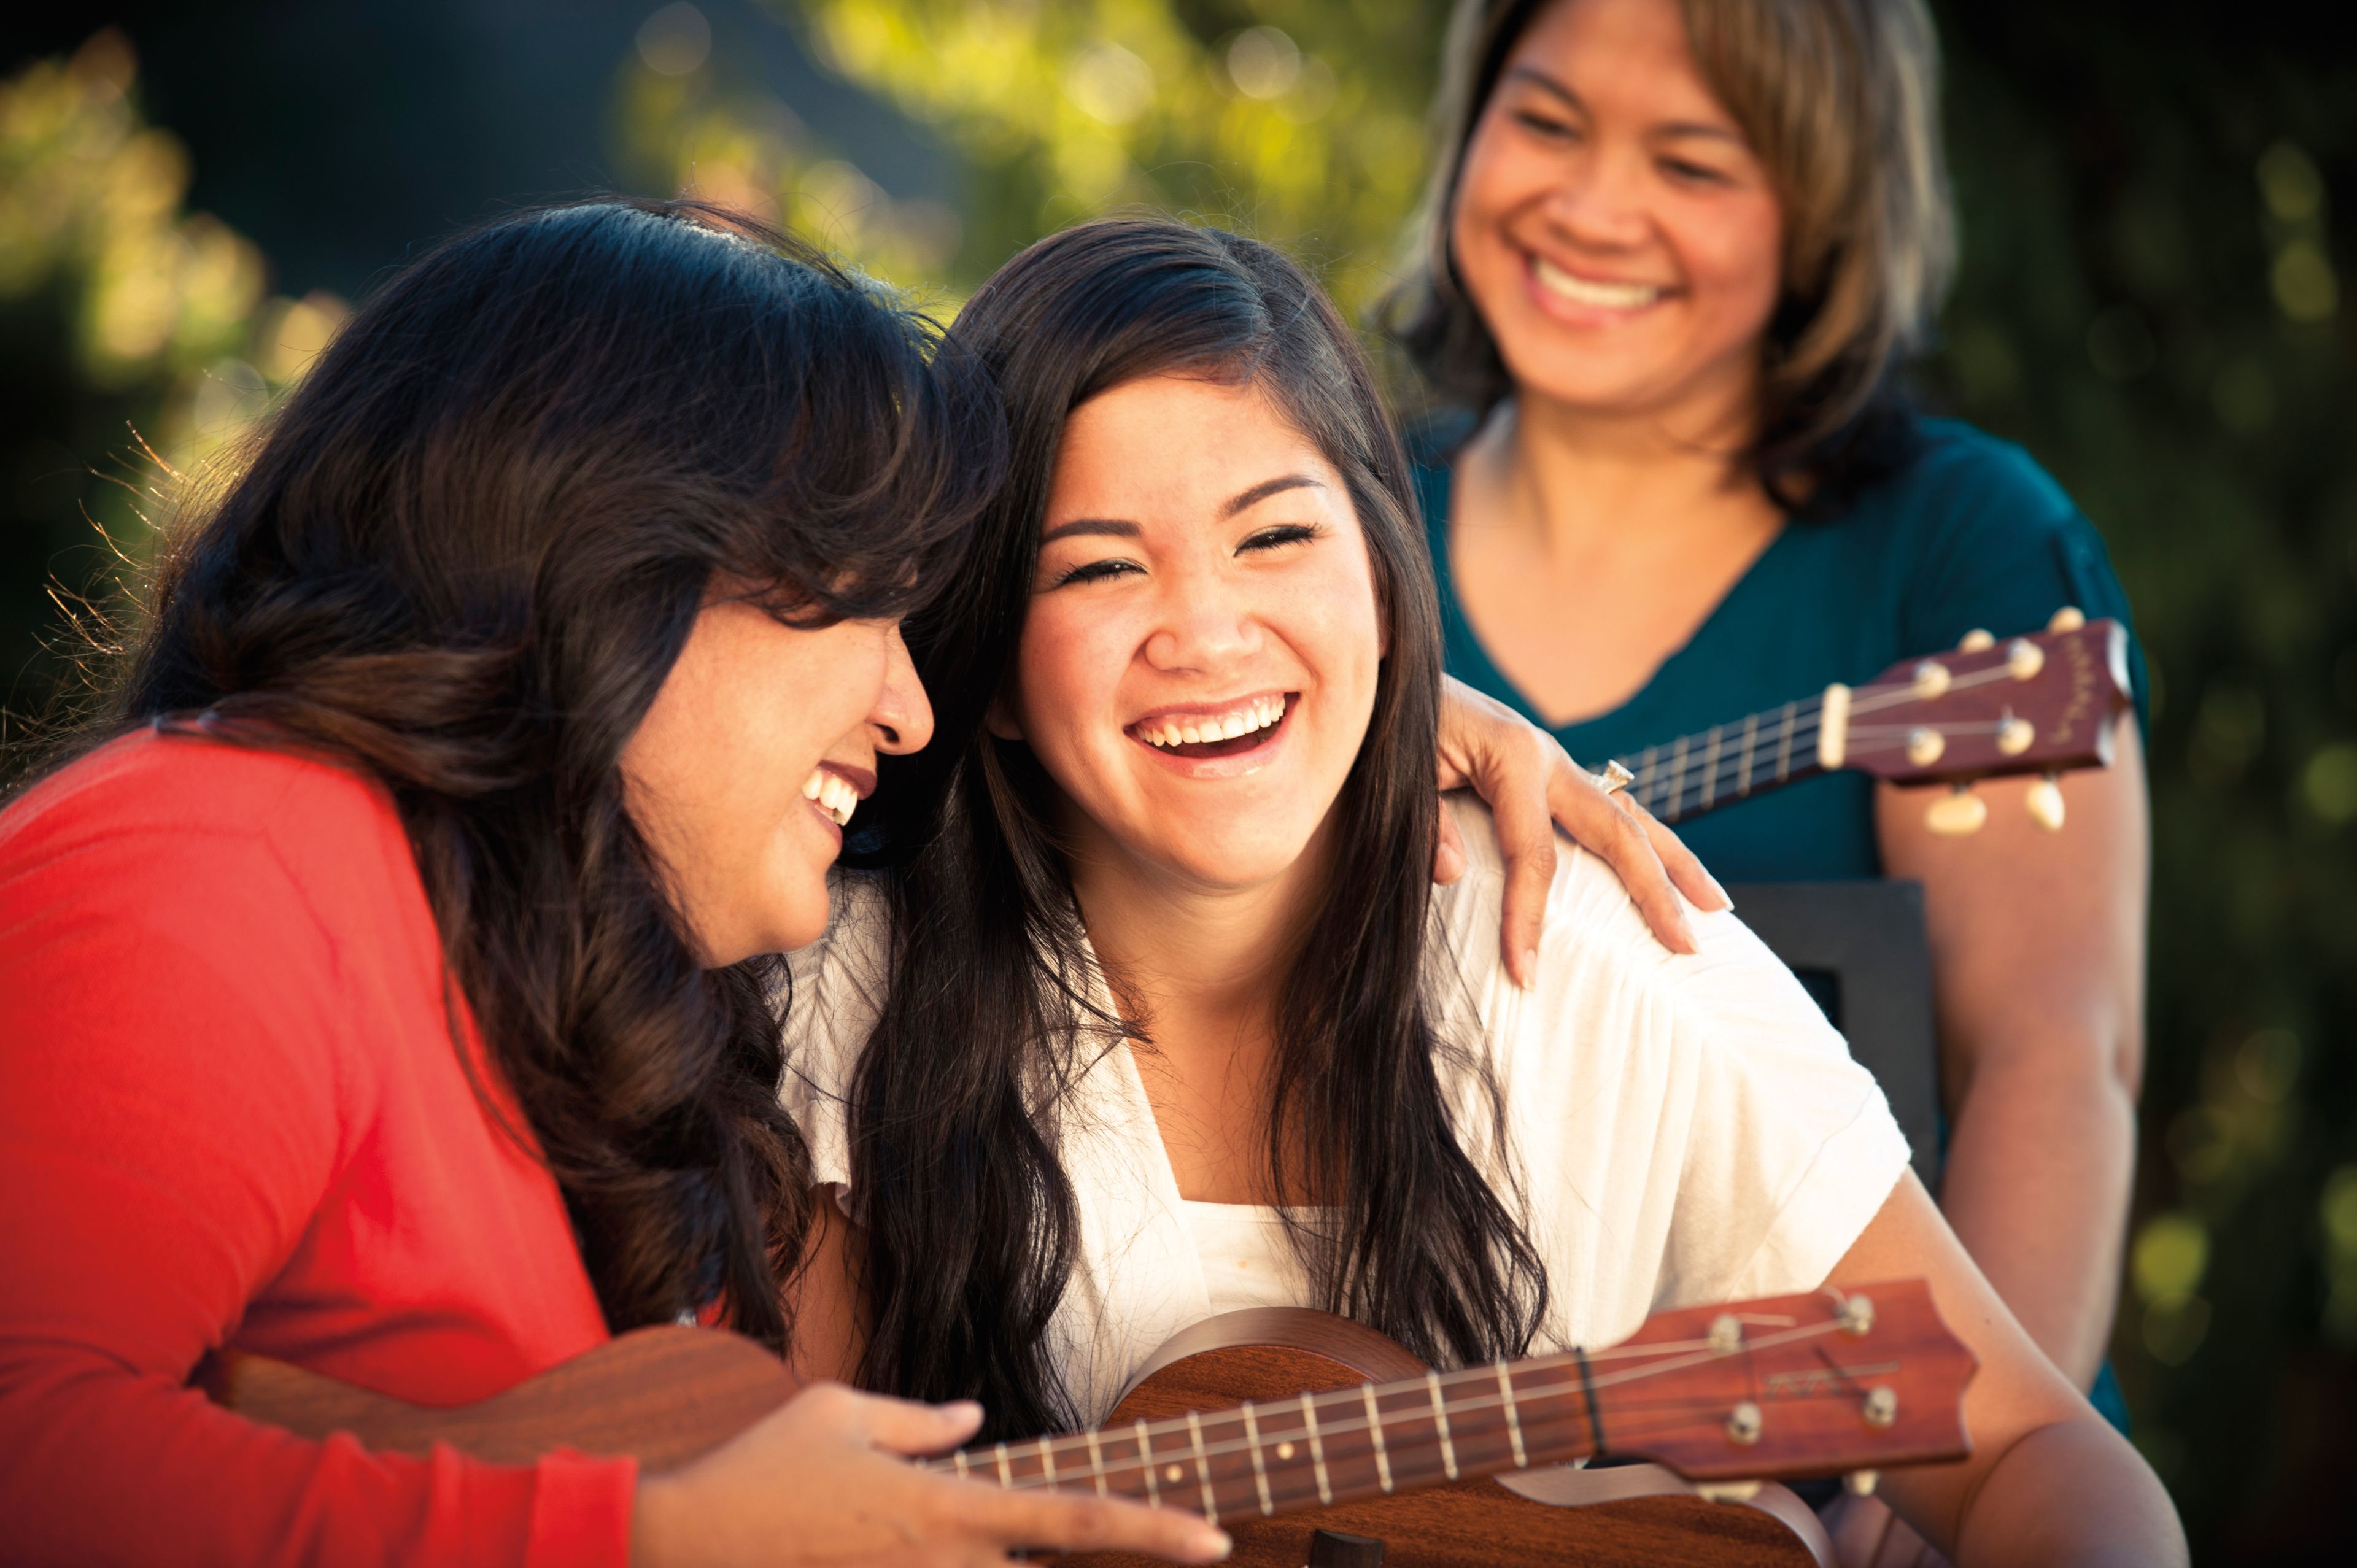 Three women sit together and play ukuleles.